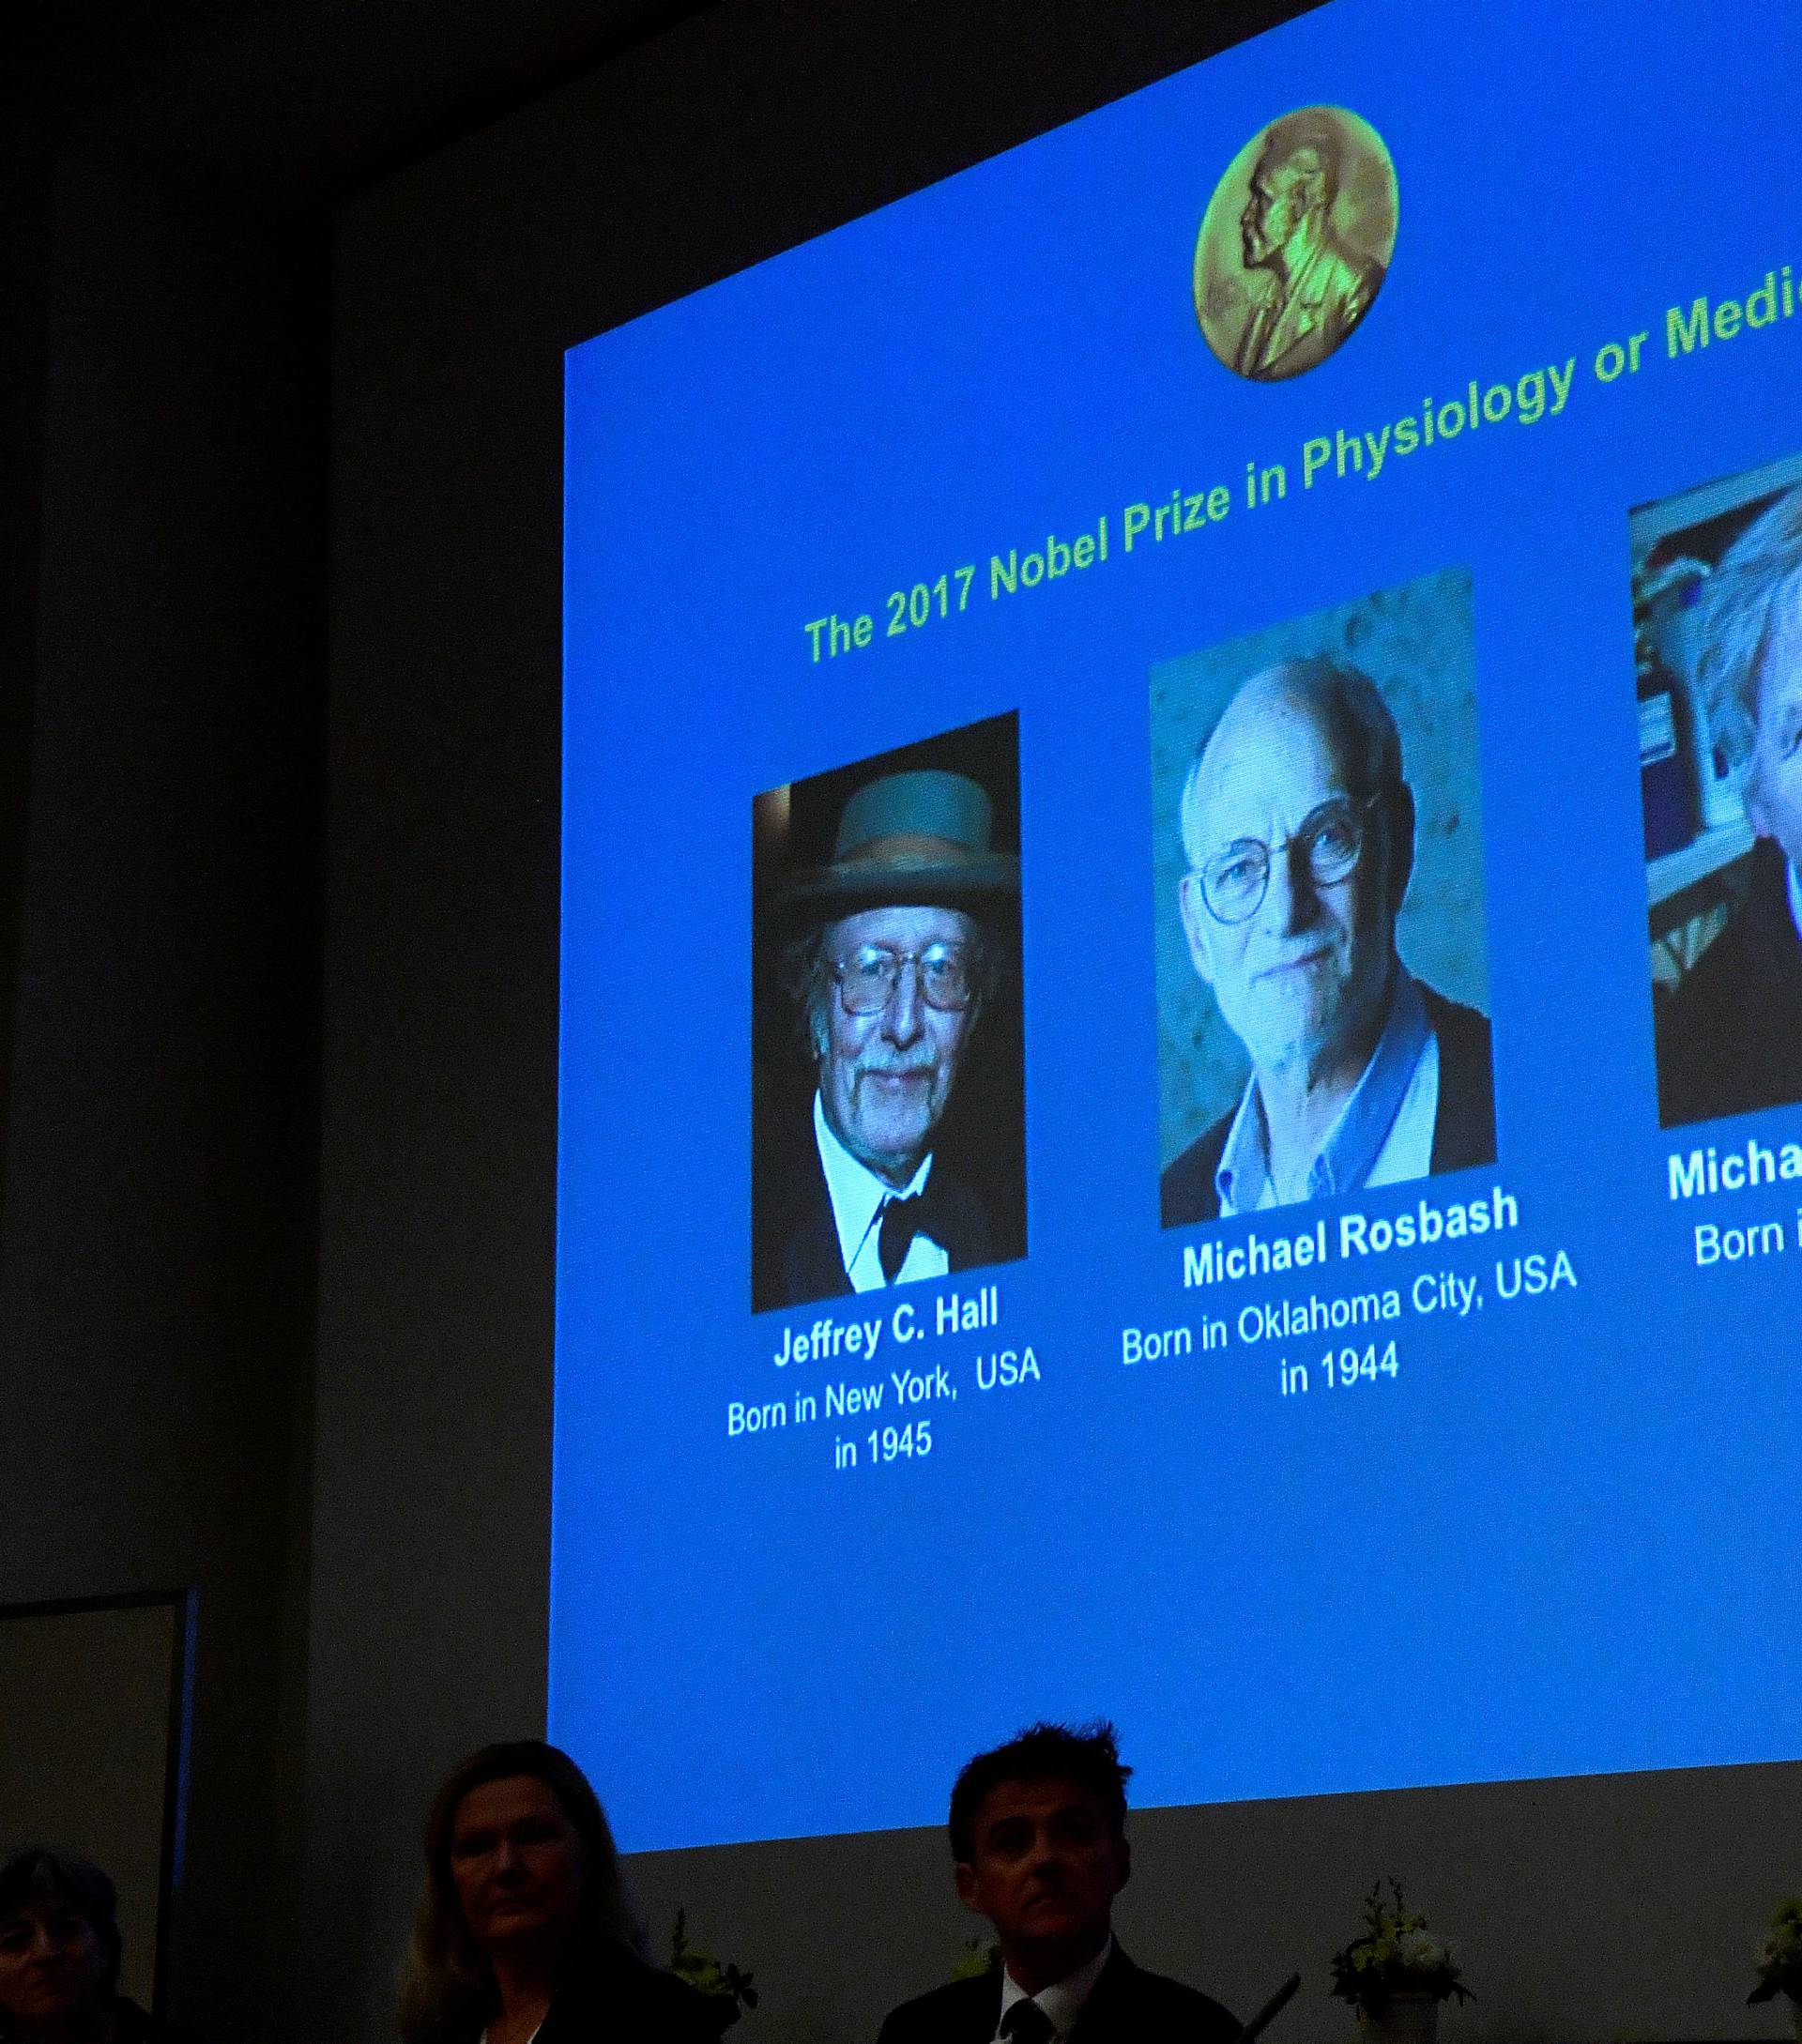 The names of Jeffrey C. Hall, Michael Rosbash and Michael W. Young are displayed during a news conference to announce the winner of the Nobel Prize in Physiology or Medicine 2017, in Stockholm